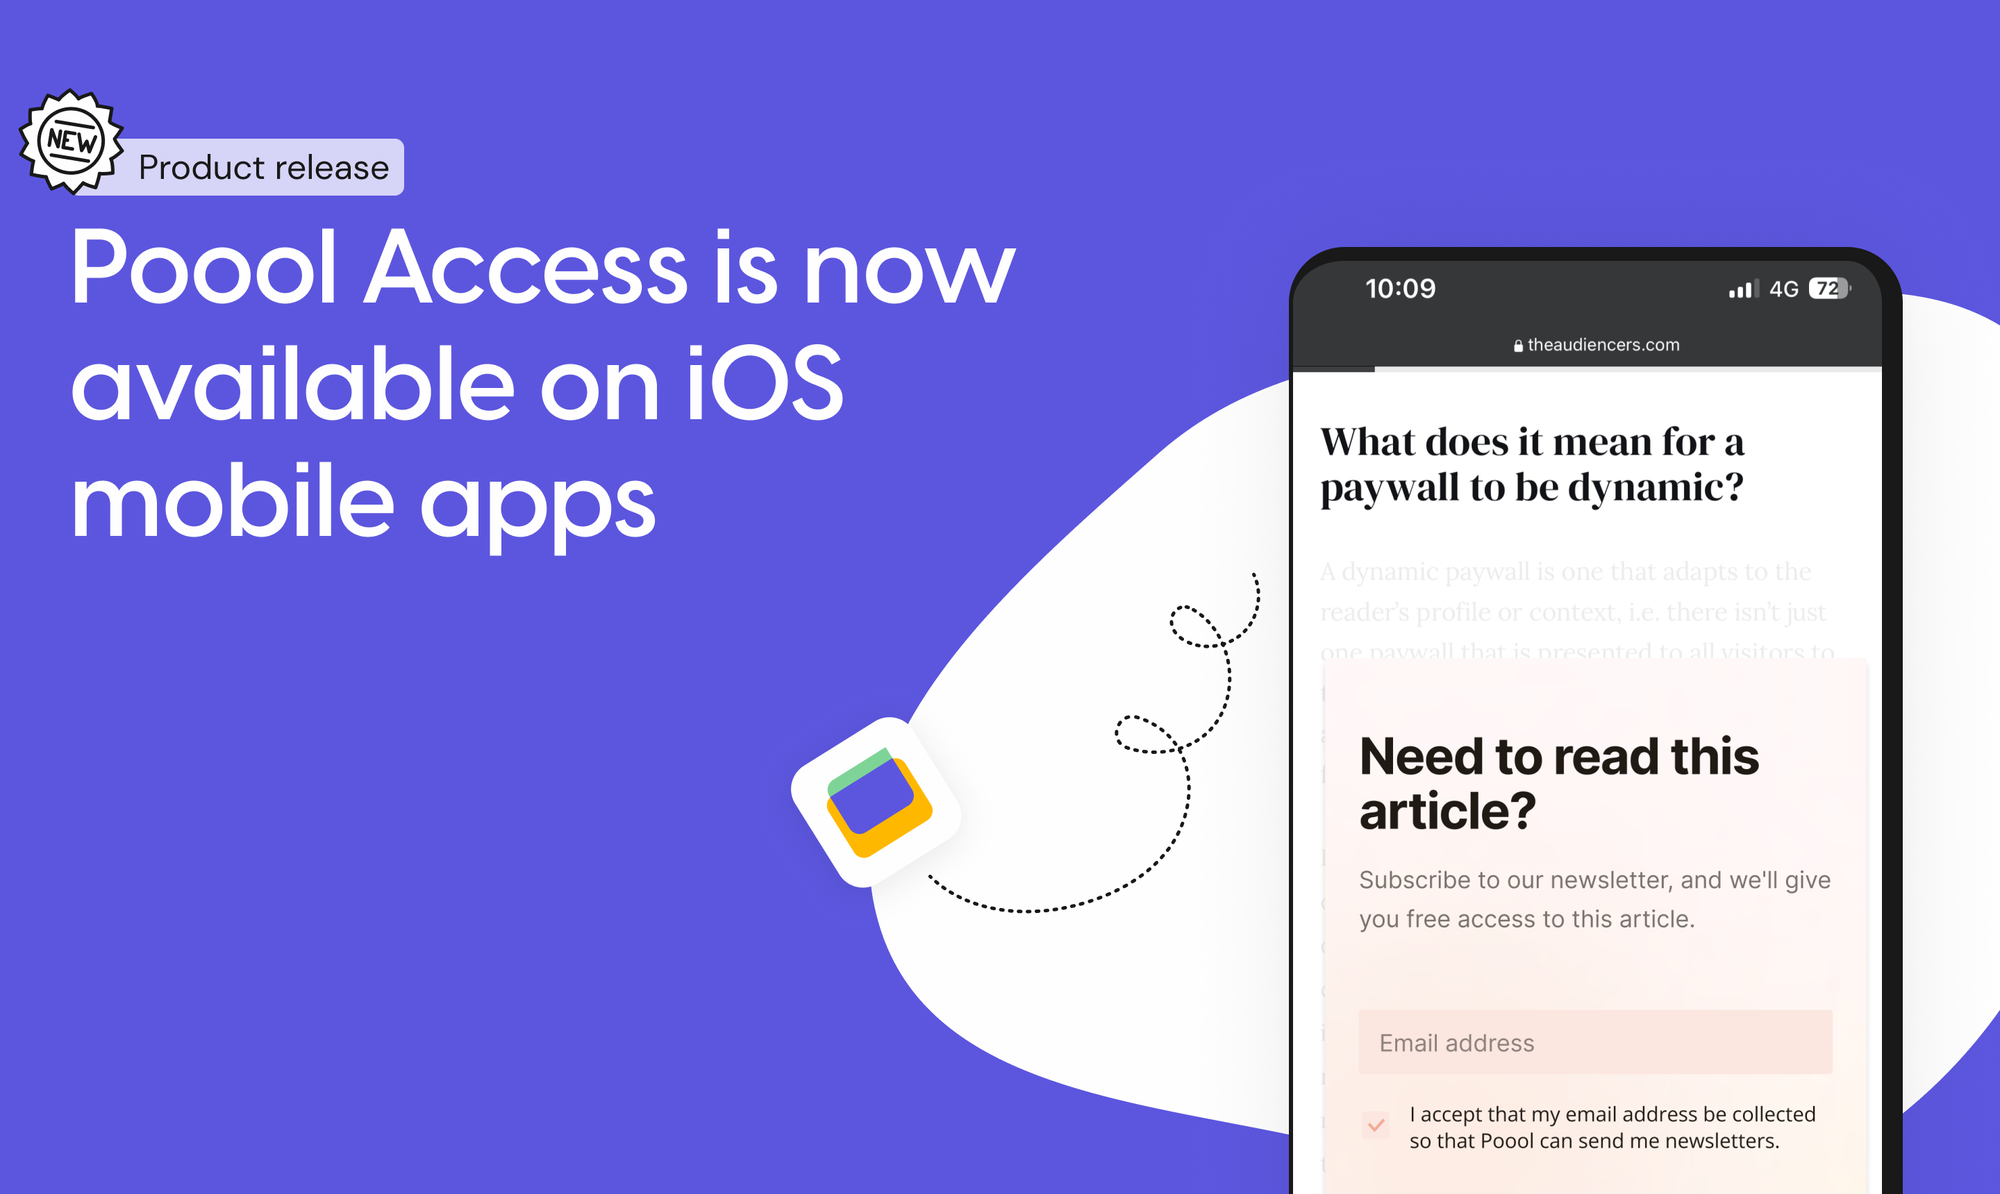 Poool’s dynamic paywall, Access, is now available on iOS mobile apps